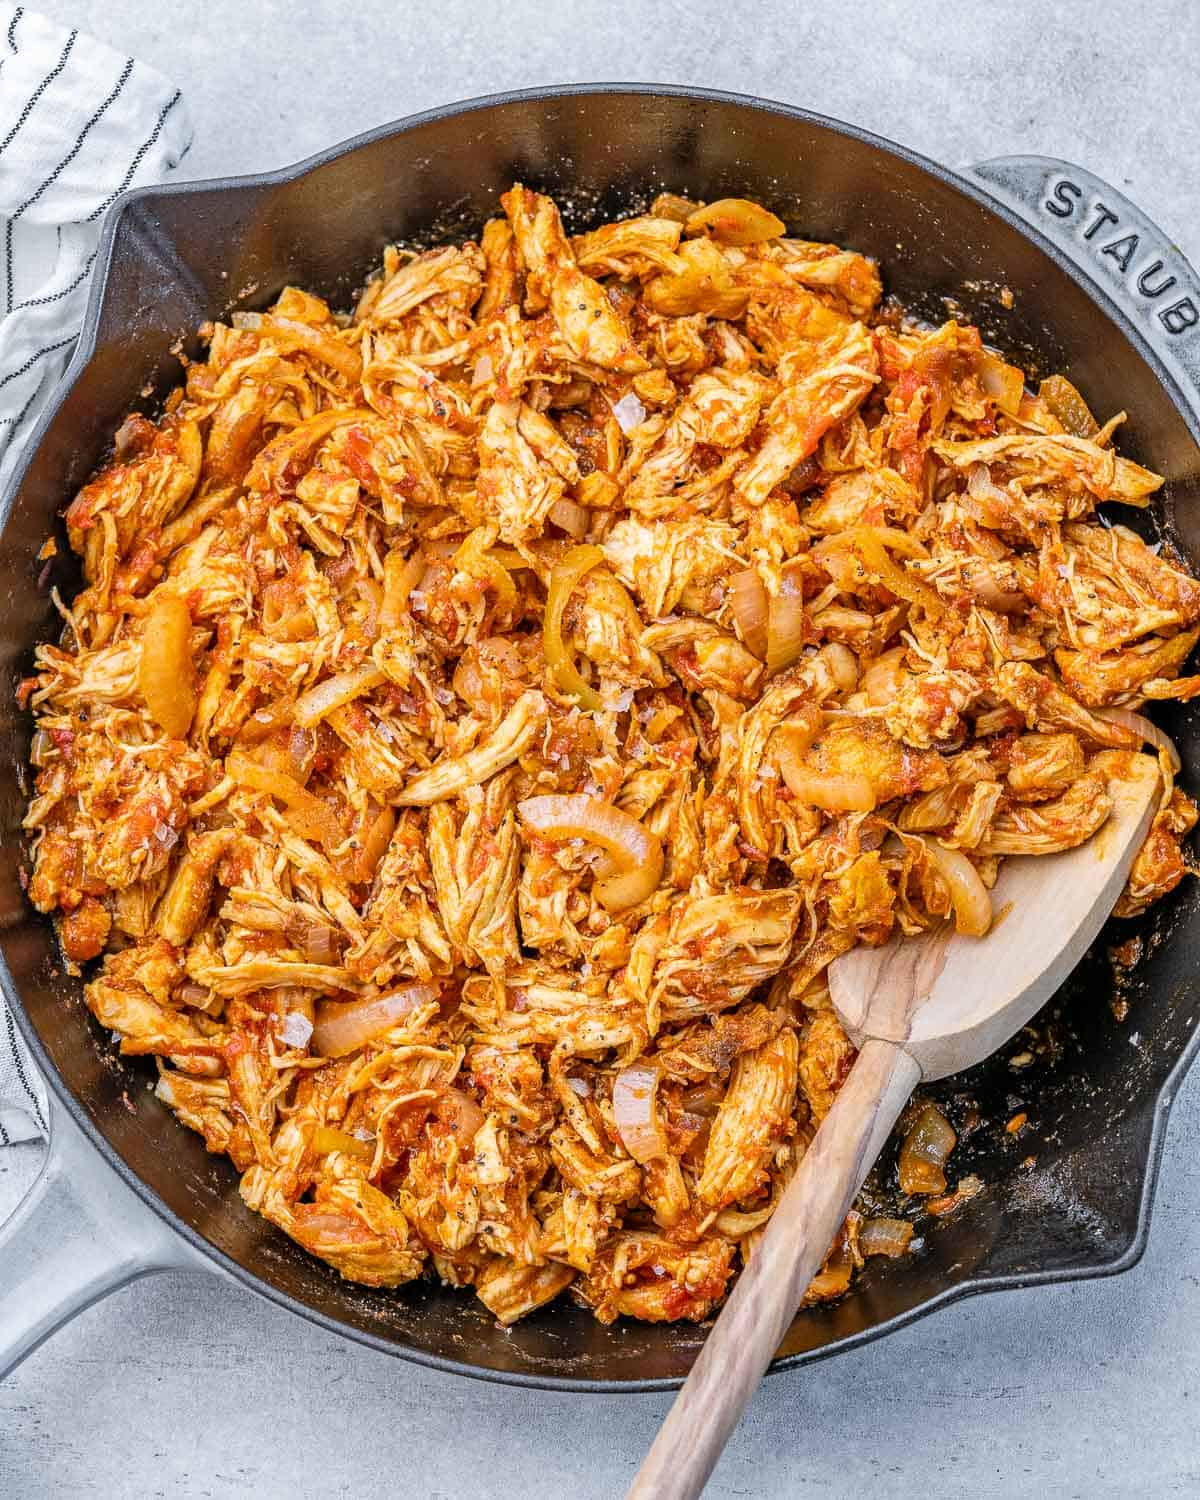 Stirring saucy shredded chicken in a skillet with a wooden spoon.